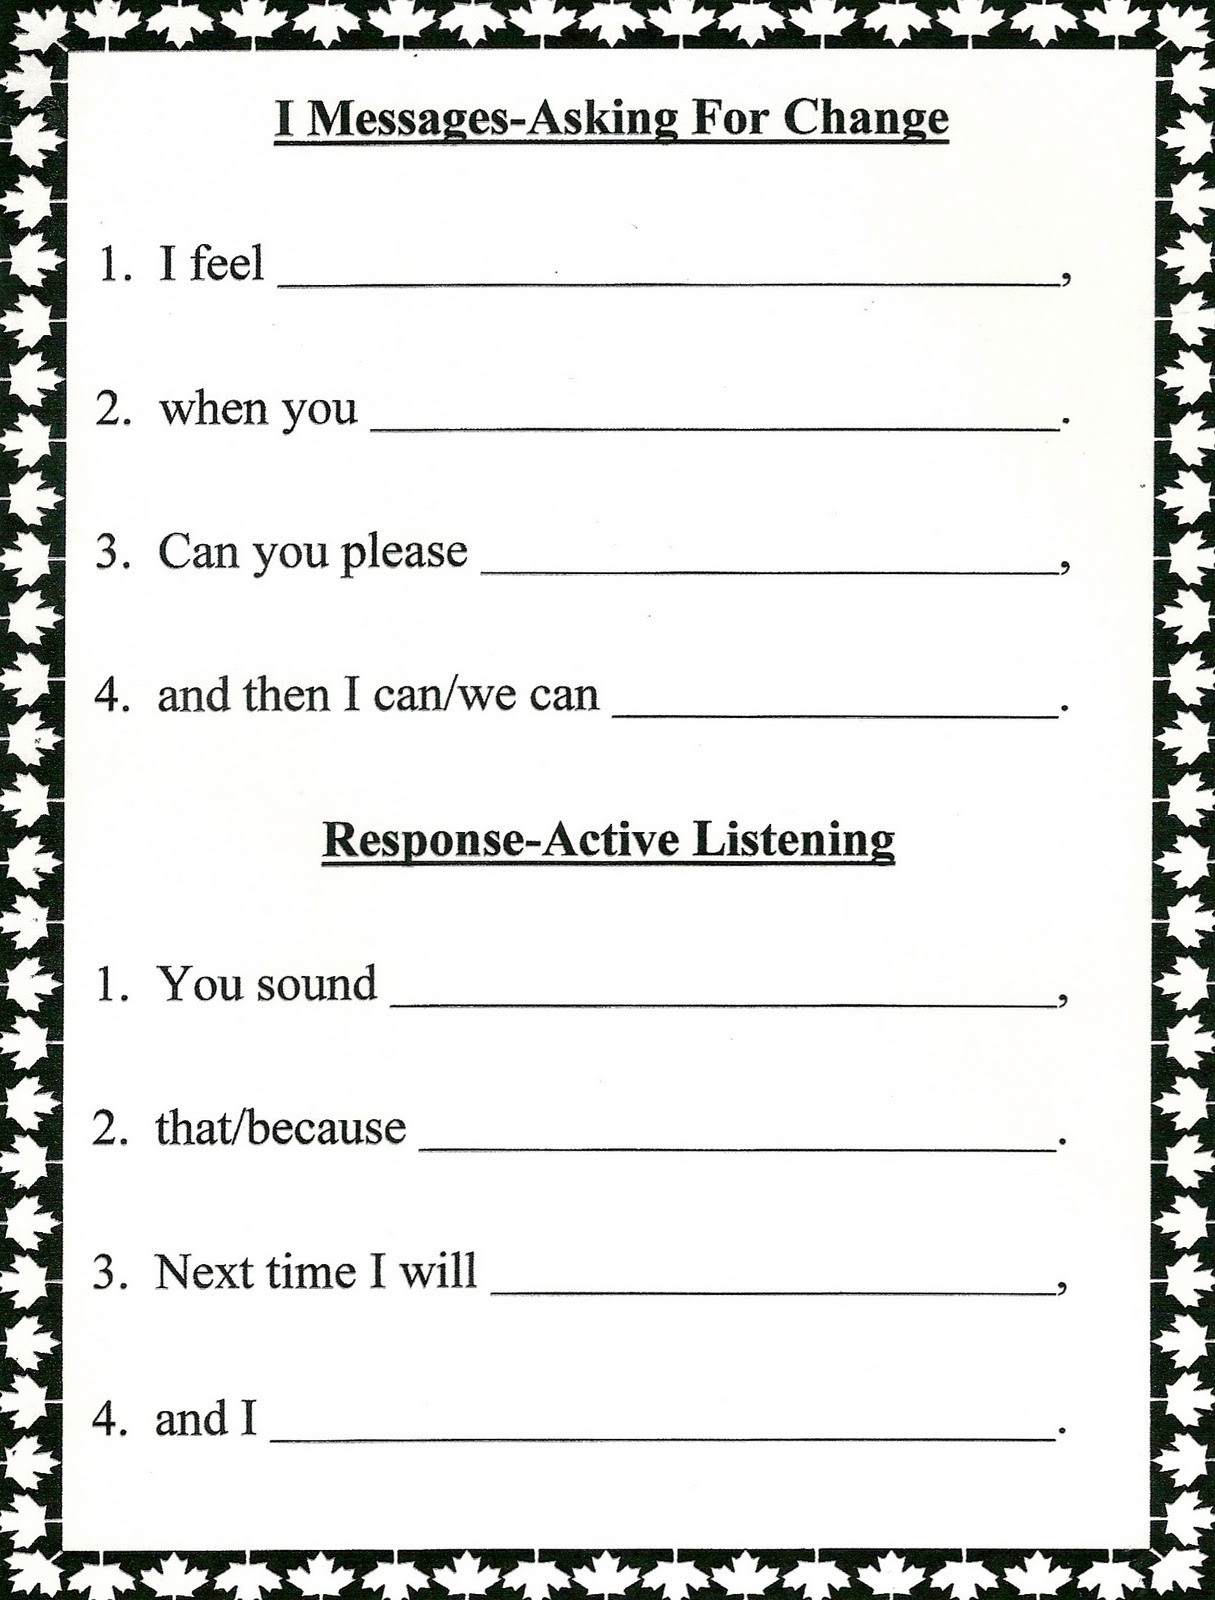 Free Printable Marriage Counseling Worksheets Marriage Counseling db